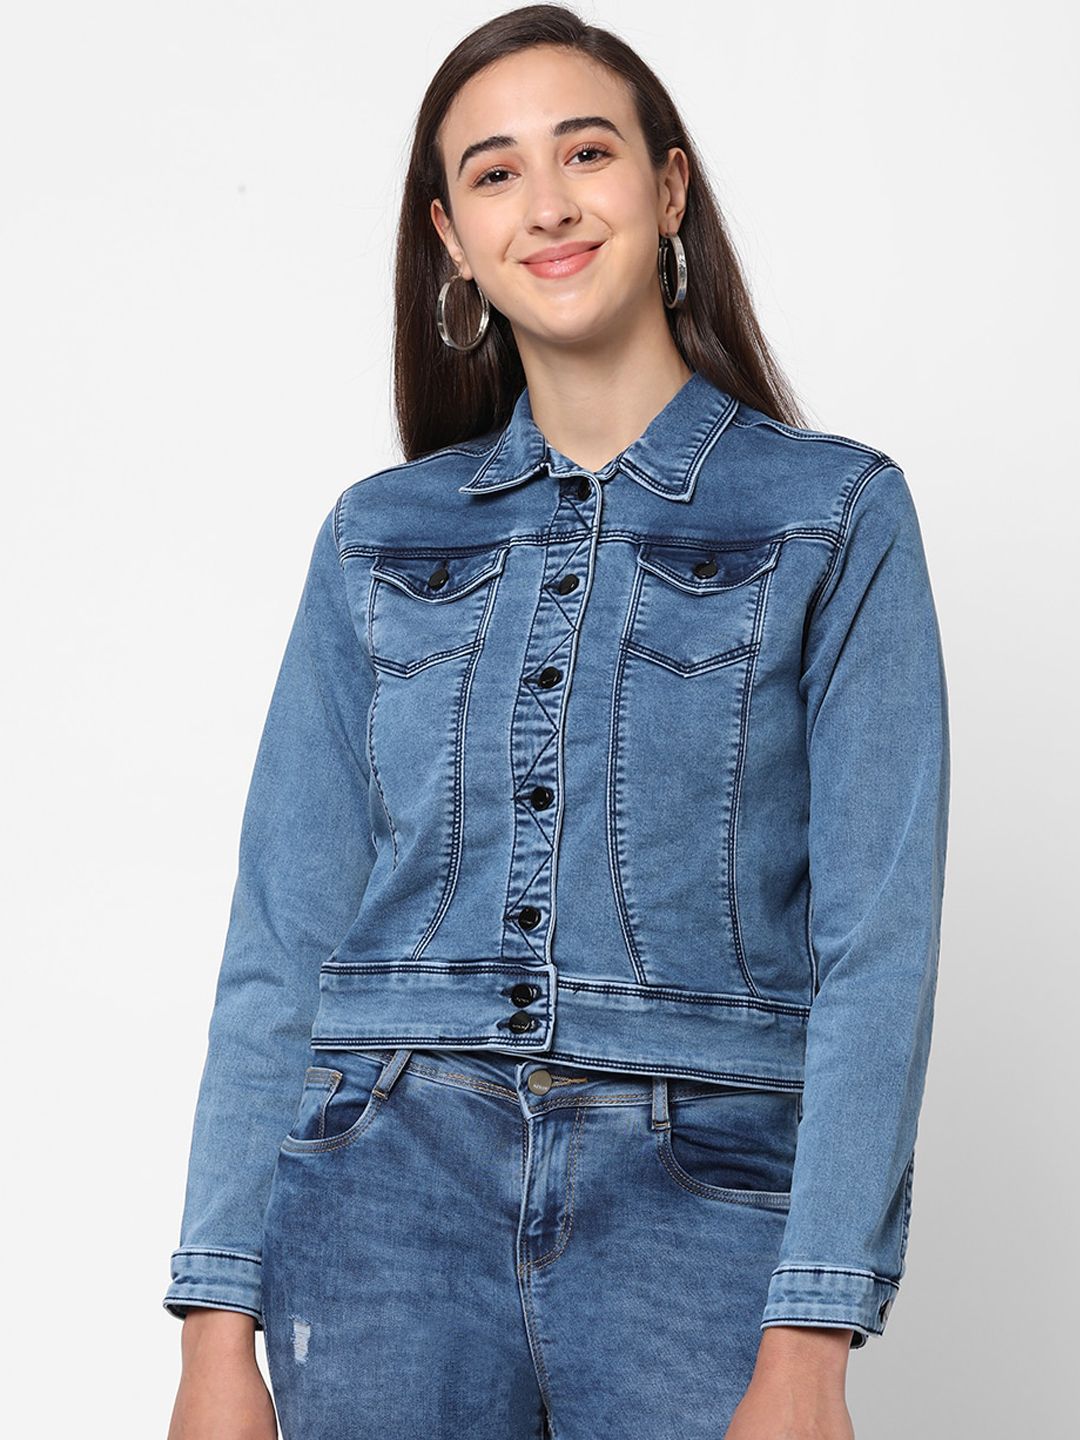 Kraus Jeans Women Blue Washed Denim Jacket with Patchwork Price in India